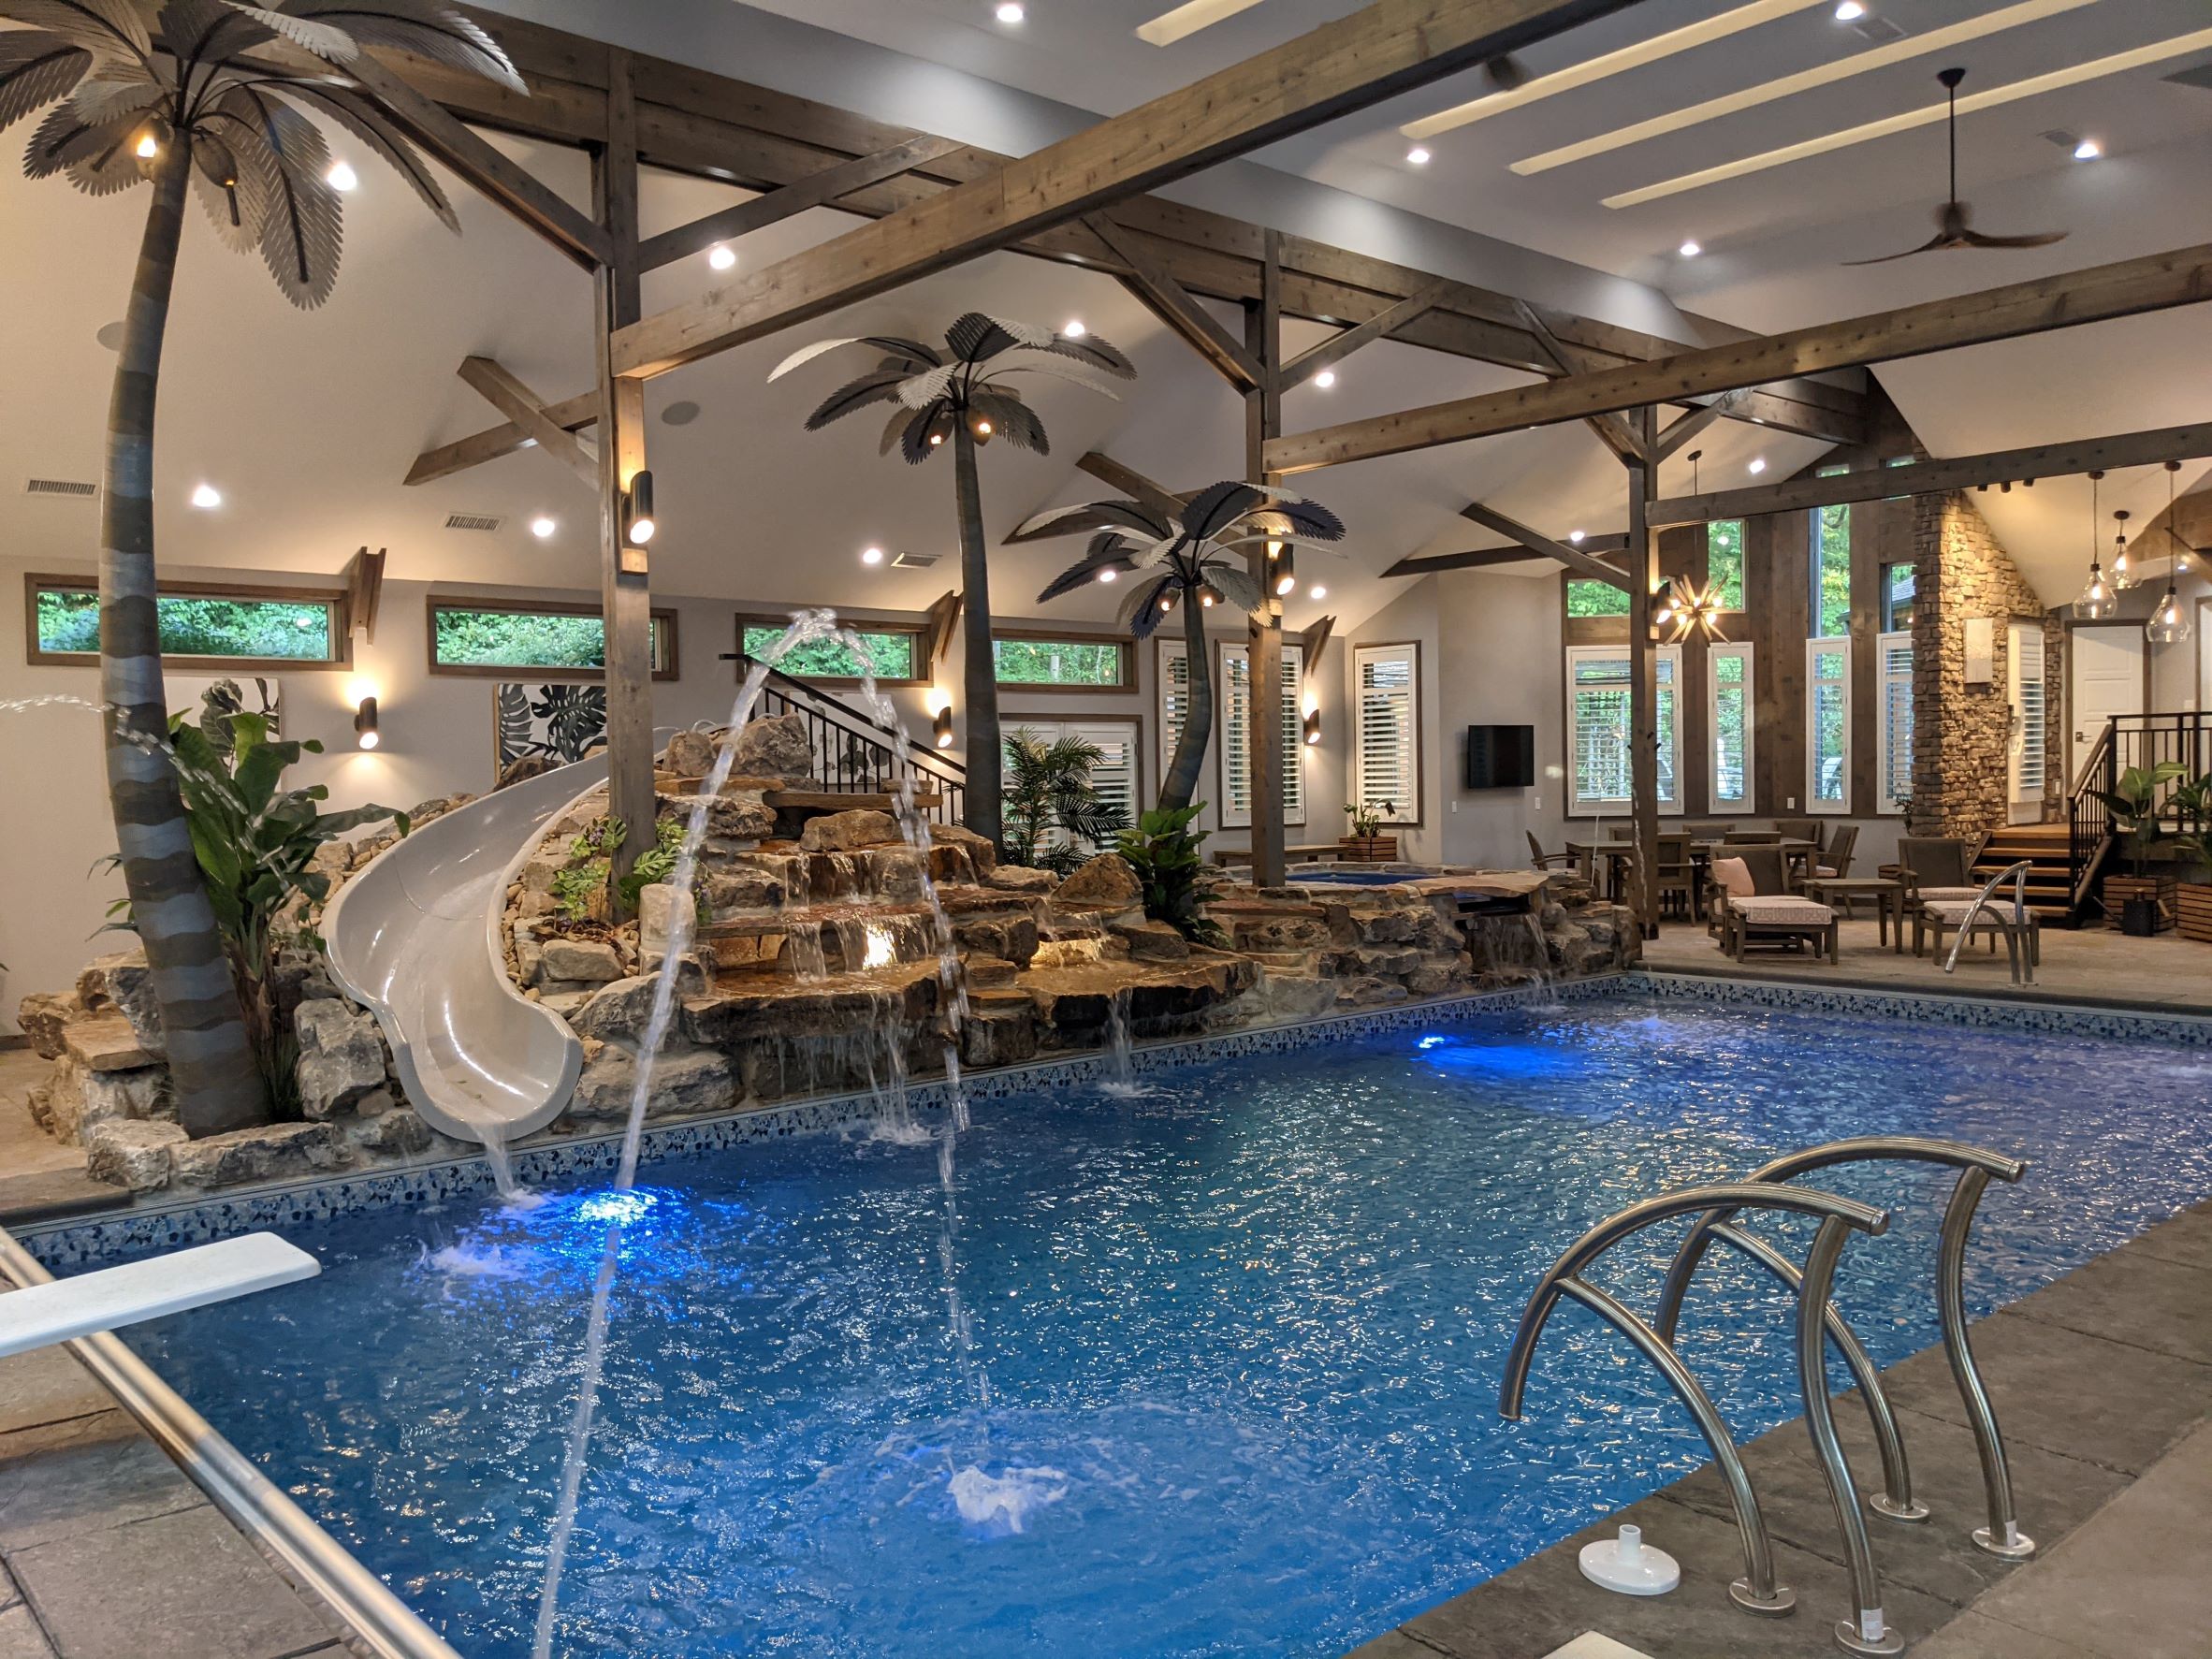 Interior View of Residential Pool Addition to Private Home with Swimming Pool in foreground and stone with waterfalls, hot tub, waterfall in background and palm trees, wood timber beams and columns outside of Pittsburgh Pennsylvania